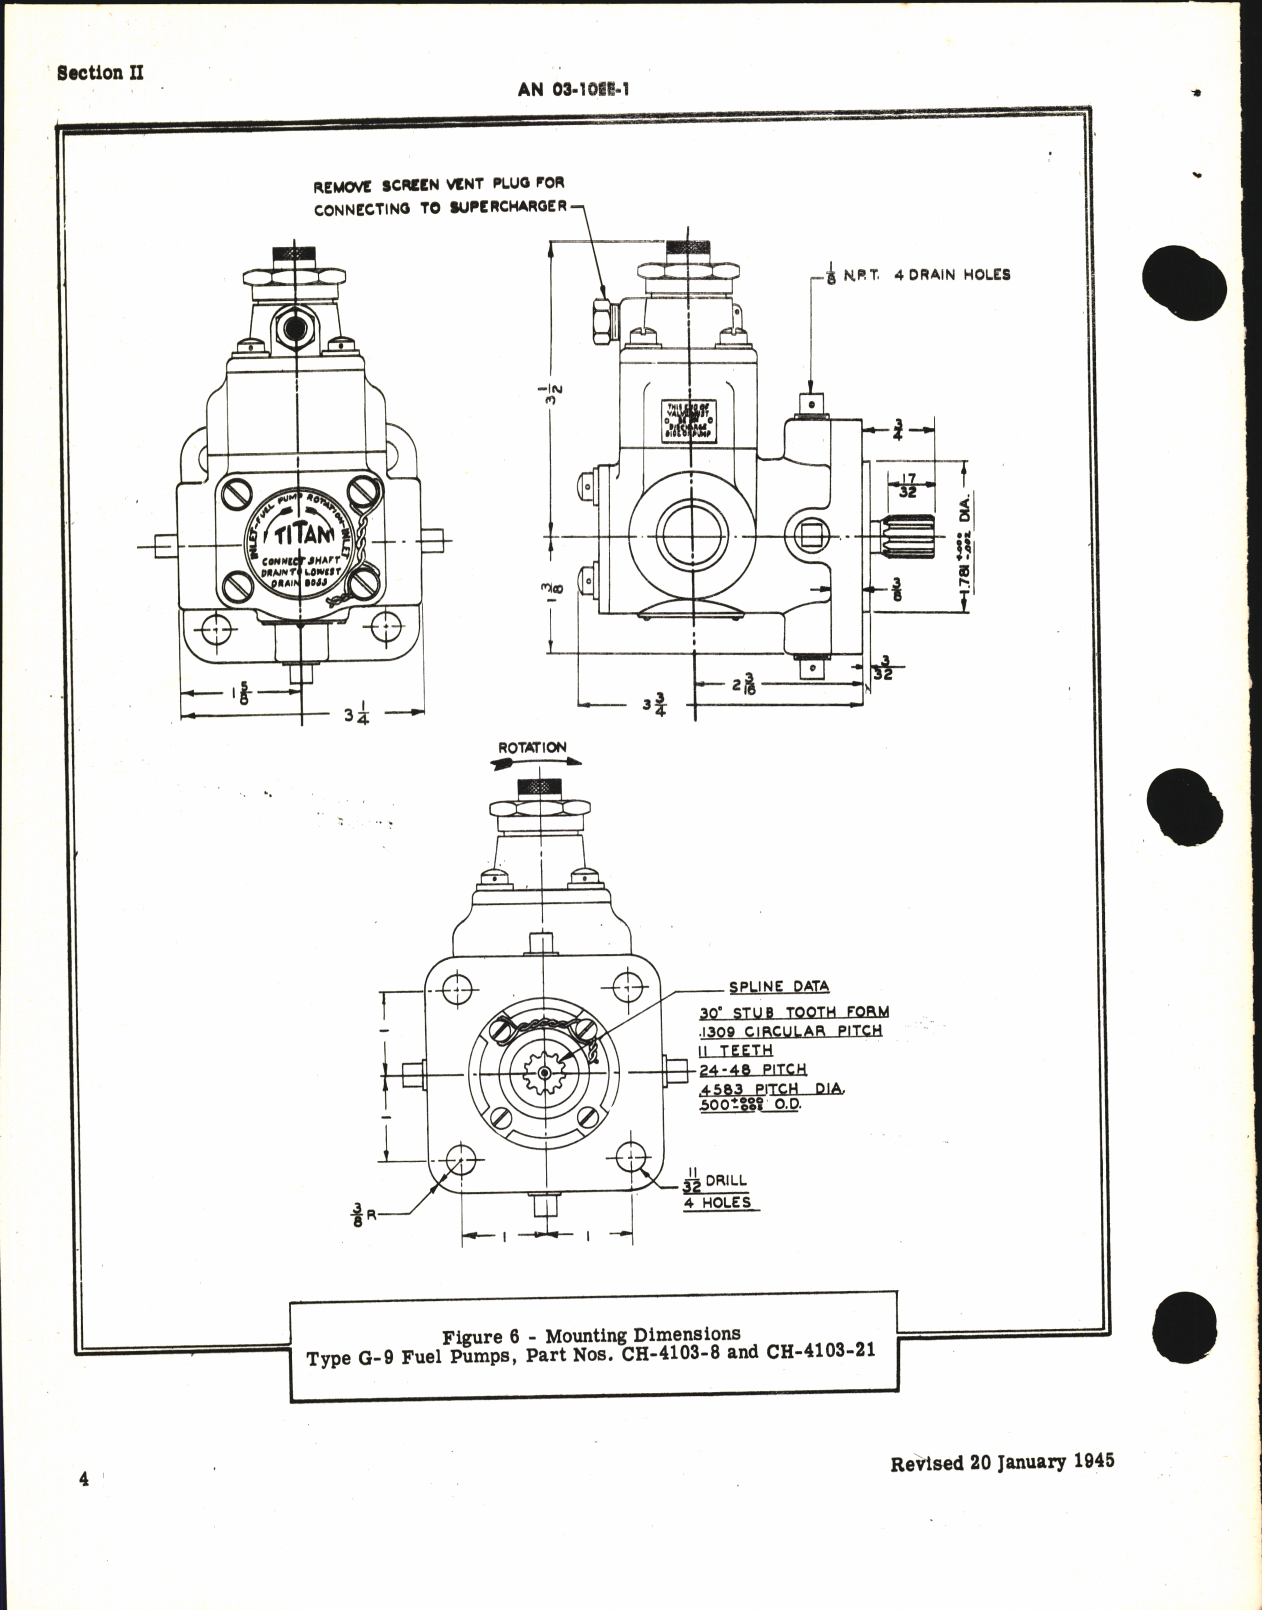 Sample page 8 from AirCorps Library document: Operation, Service, & Overhaul Instructions with Parts Catalog for Engine-Driven Fuel Pumps